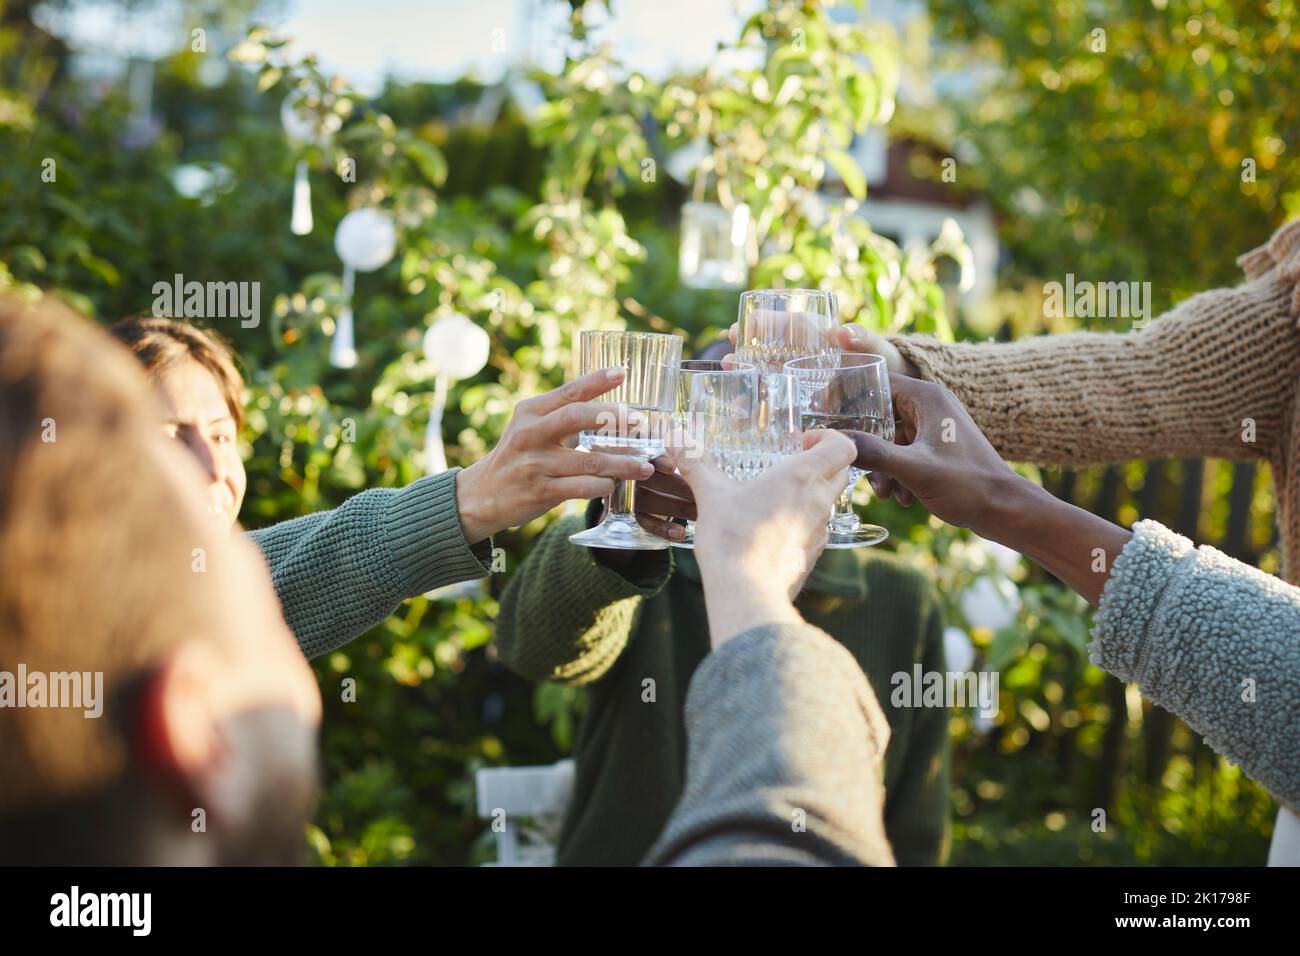 Hands with wineglasses toasting Stock Photo